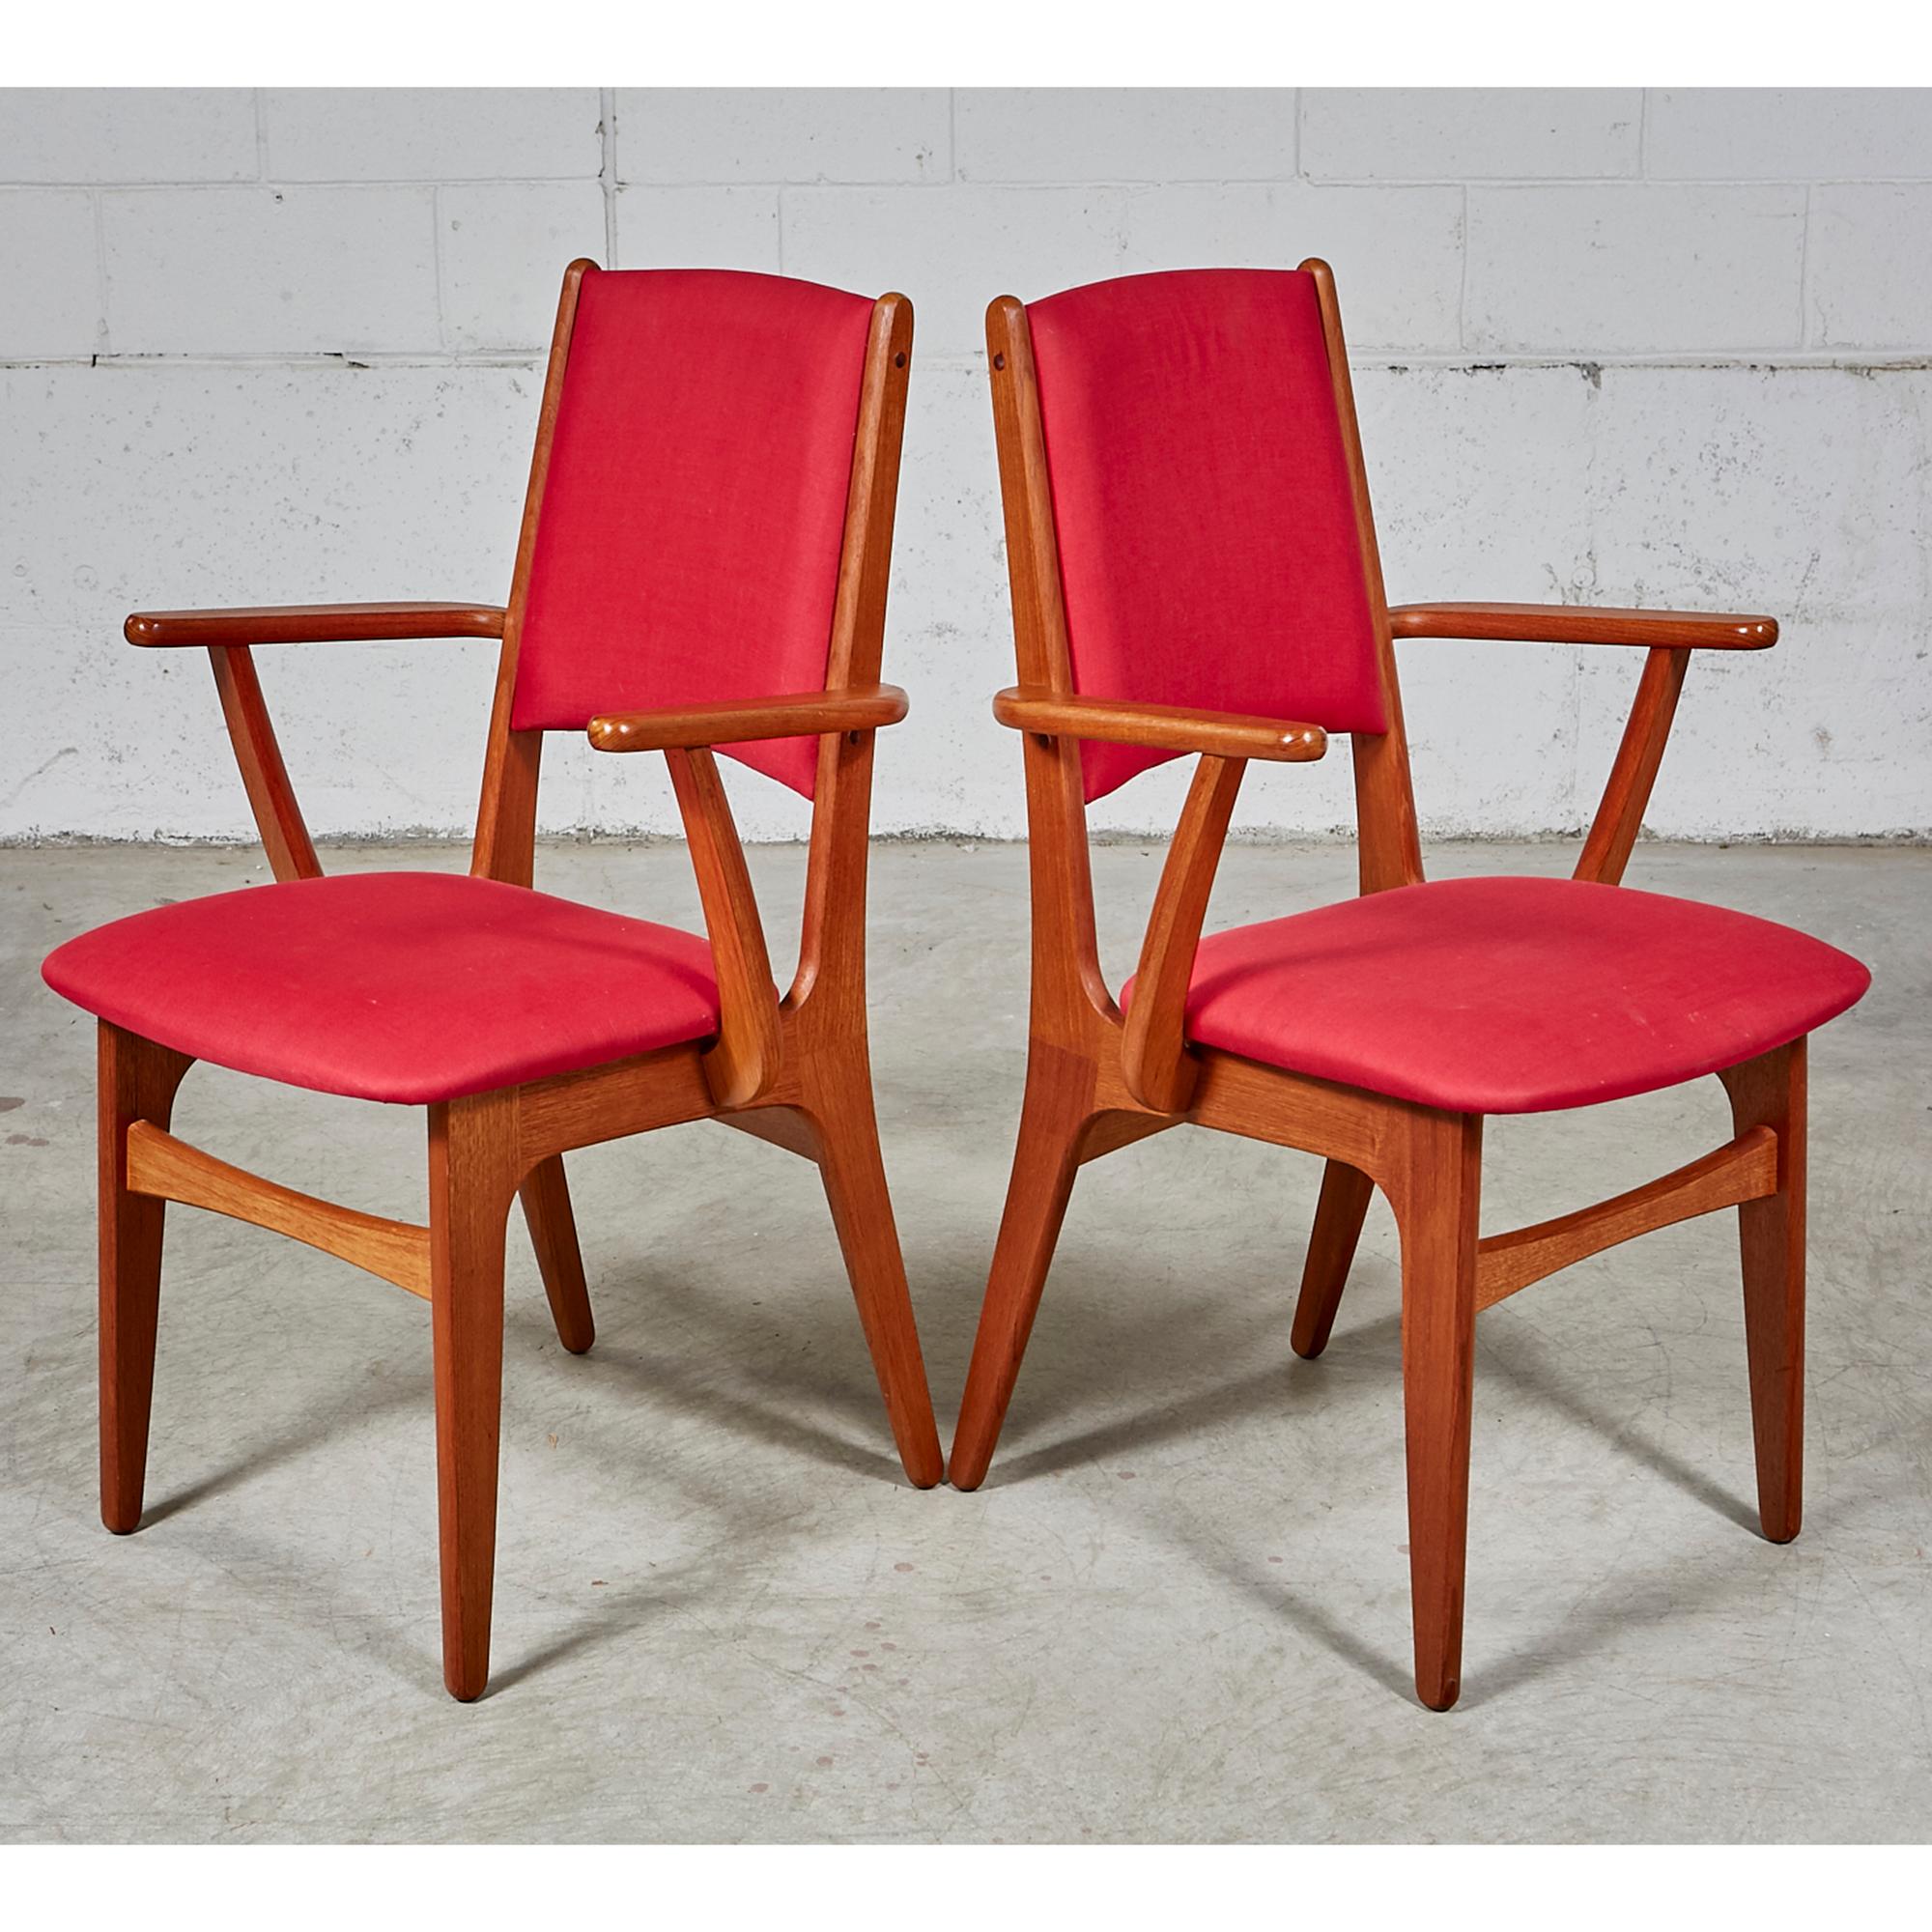 Fabric 1970s Teak Dining Table and Chairs For Sale